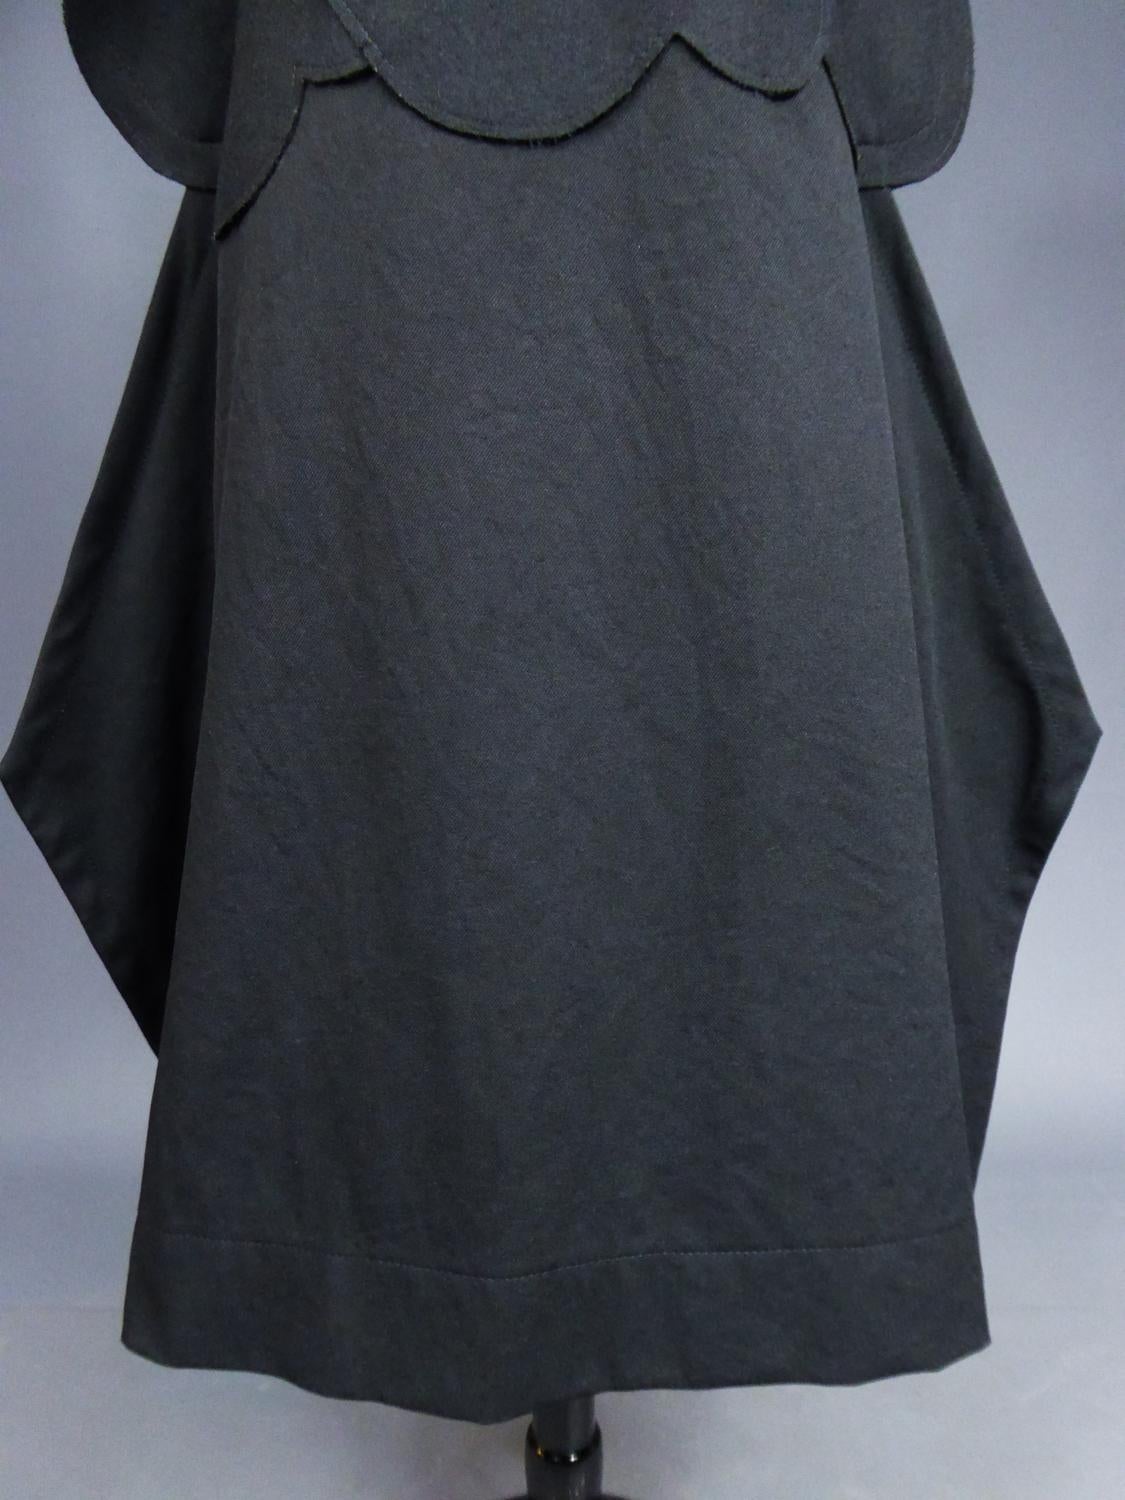 A Comme des Garcons Junya Watanabe Black Woollen Chasuble Dress Circa 2000 For Sale 2